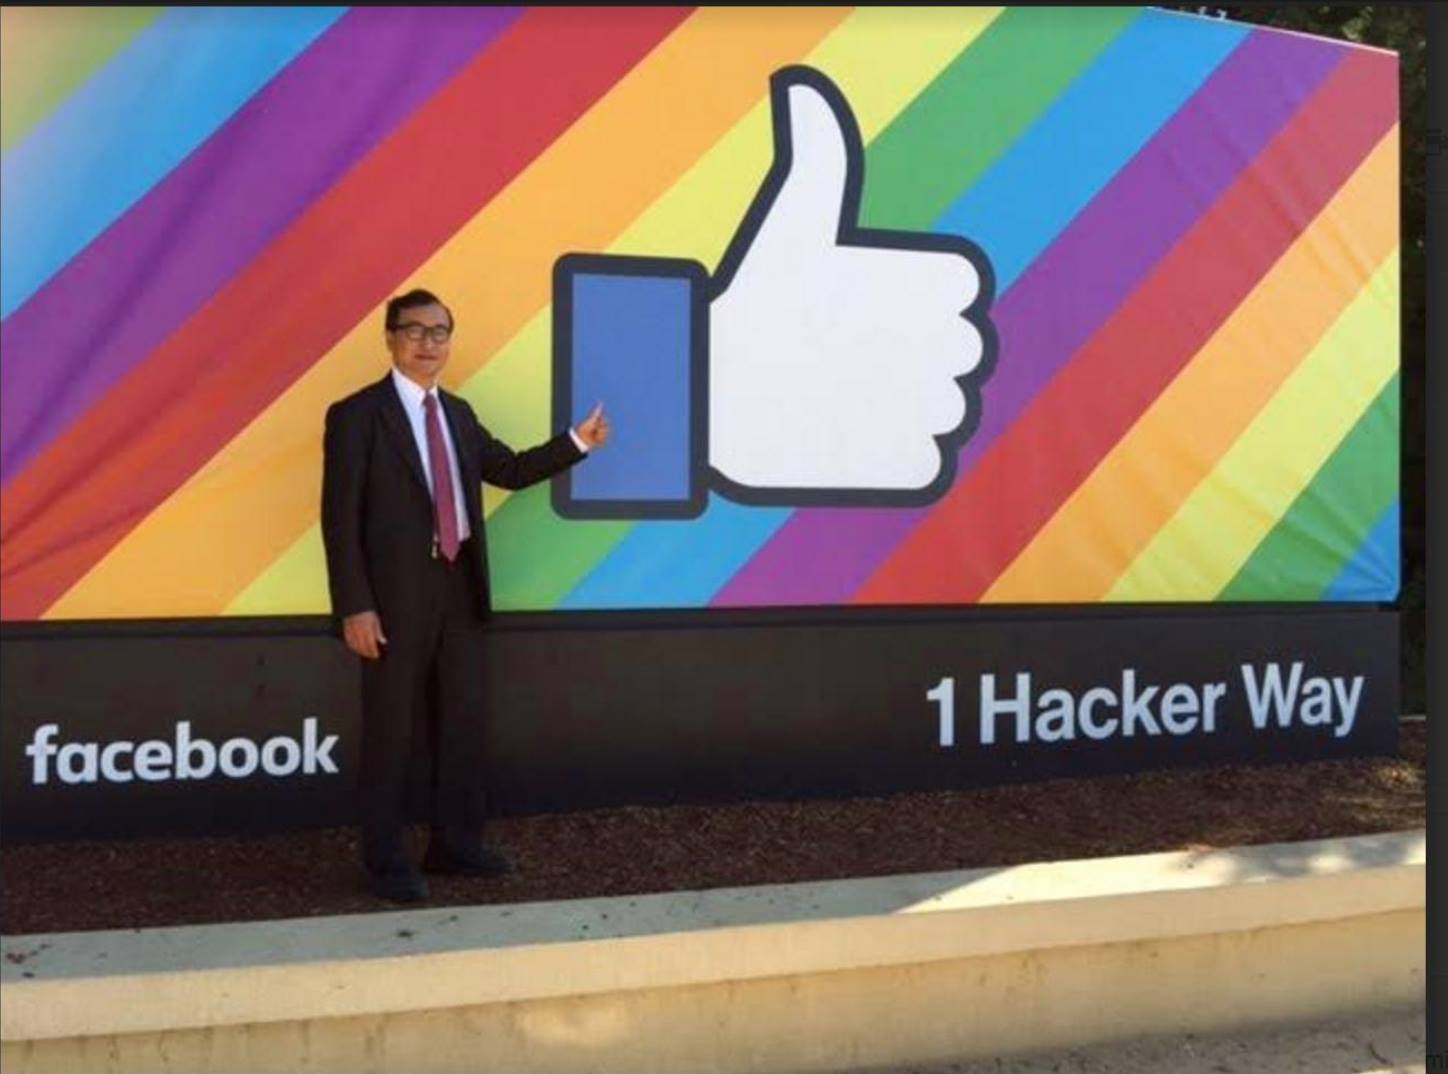 Sam Rainsy’s legal action in the U.S. on the misuse of Facebook by Hun Sen